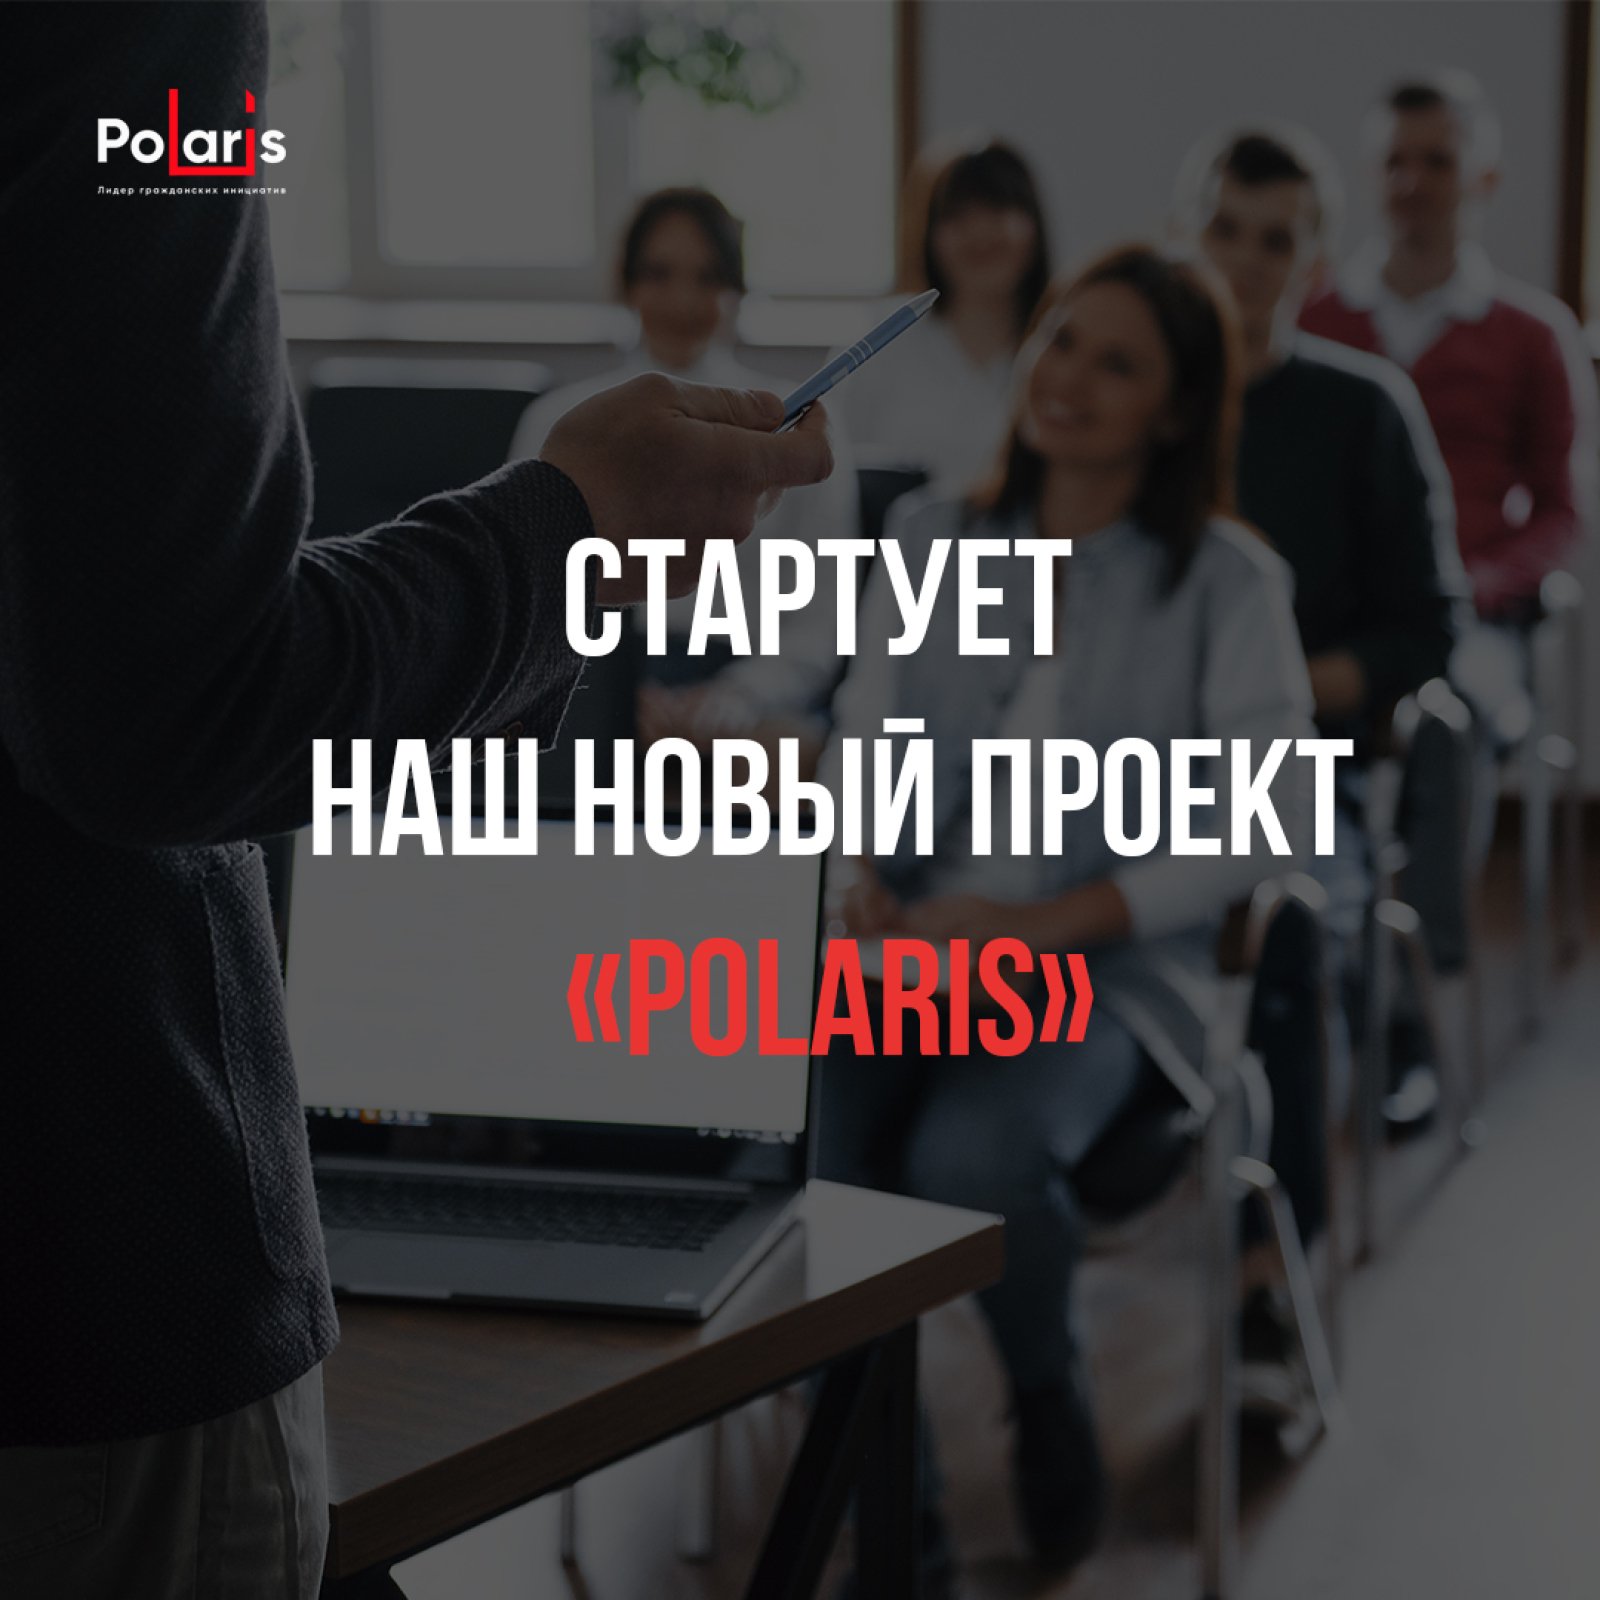 Launch of Polaris project